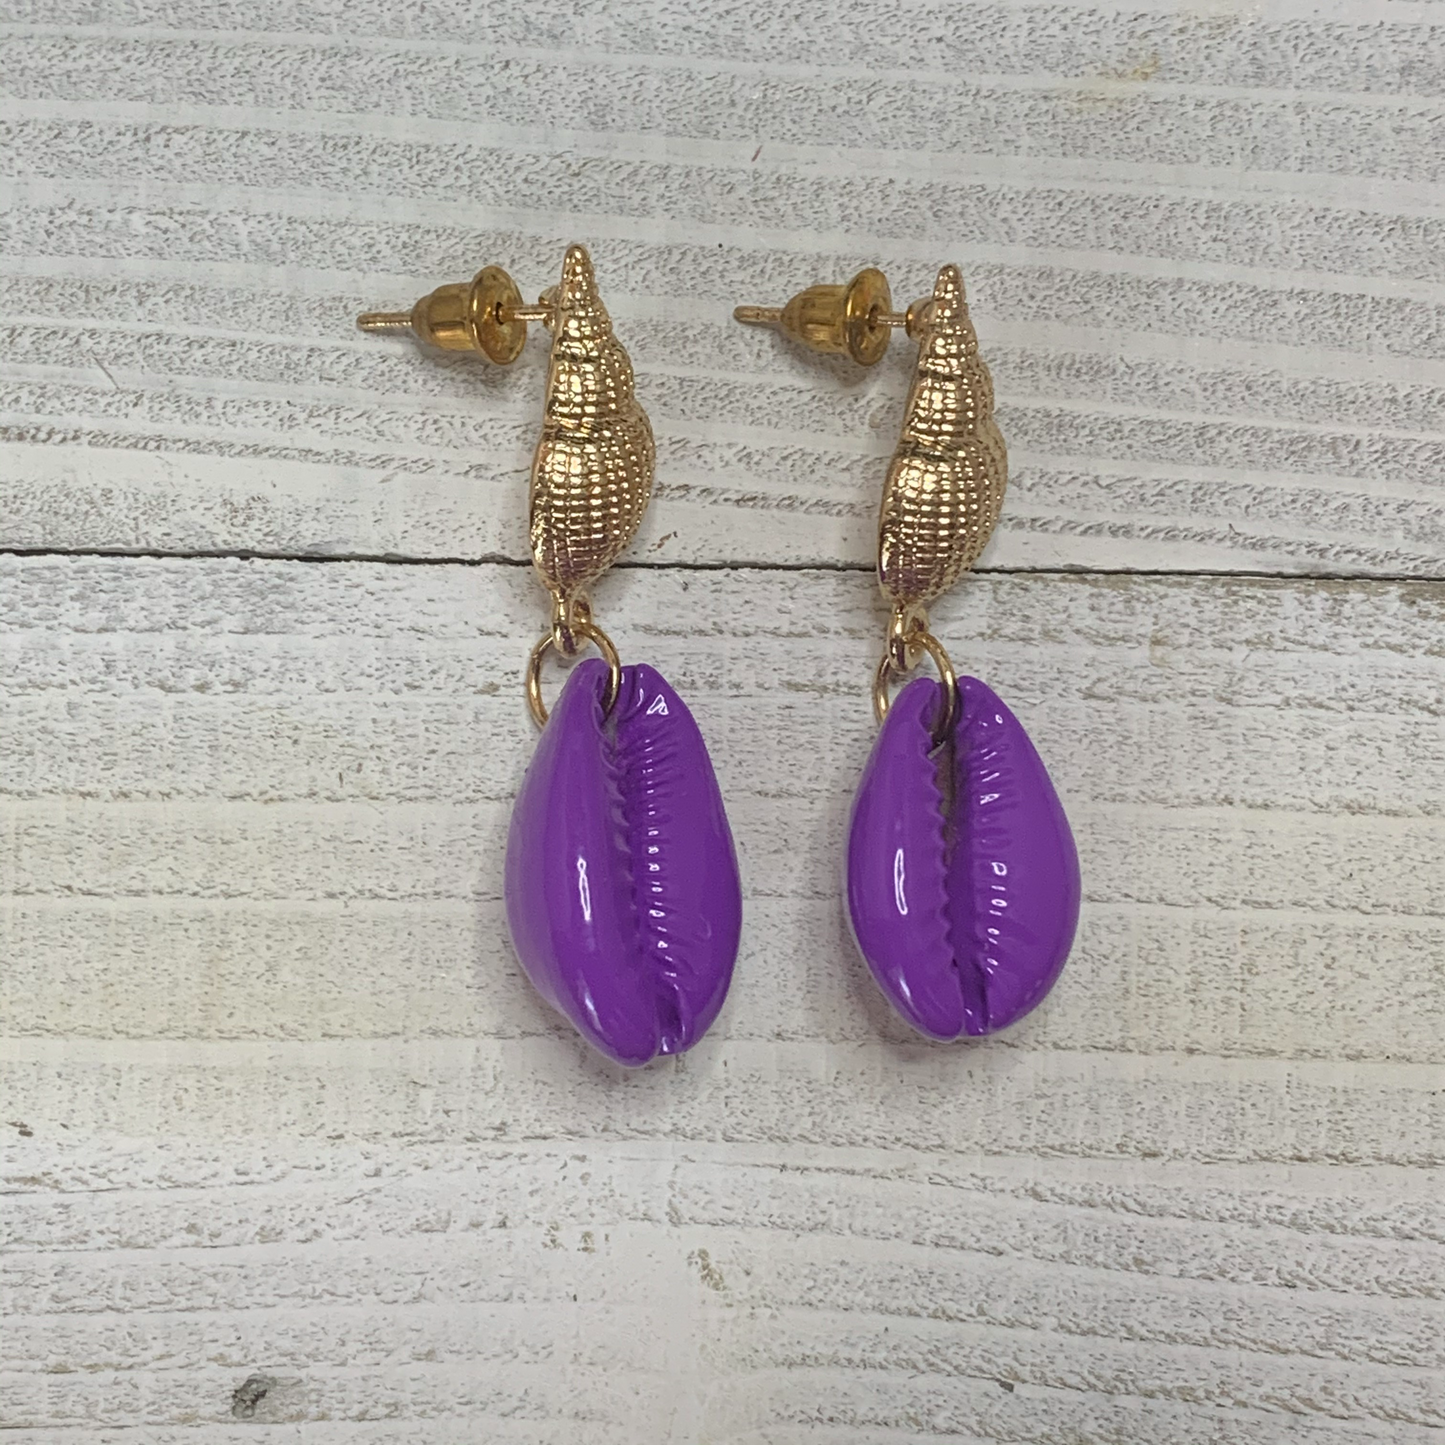 Gold Plated earrings with purple cowry shells